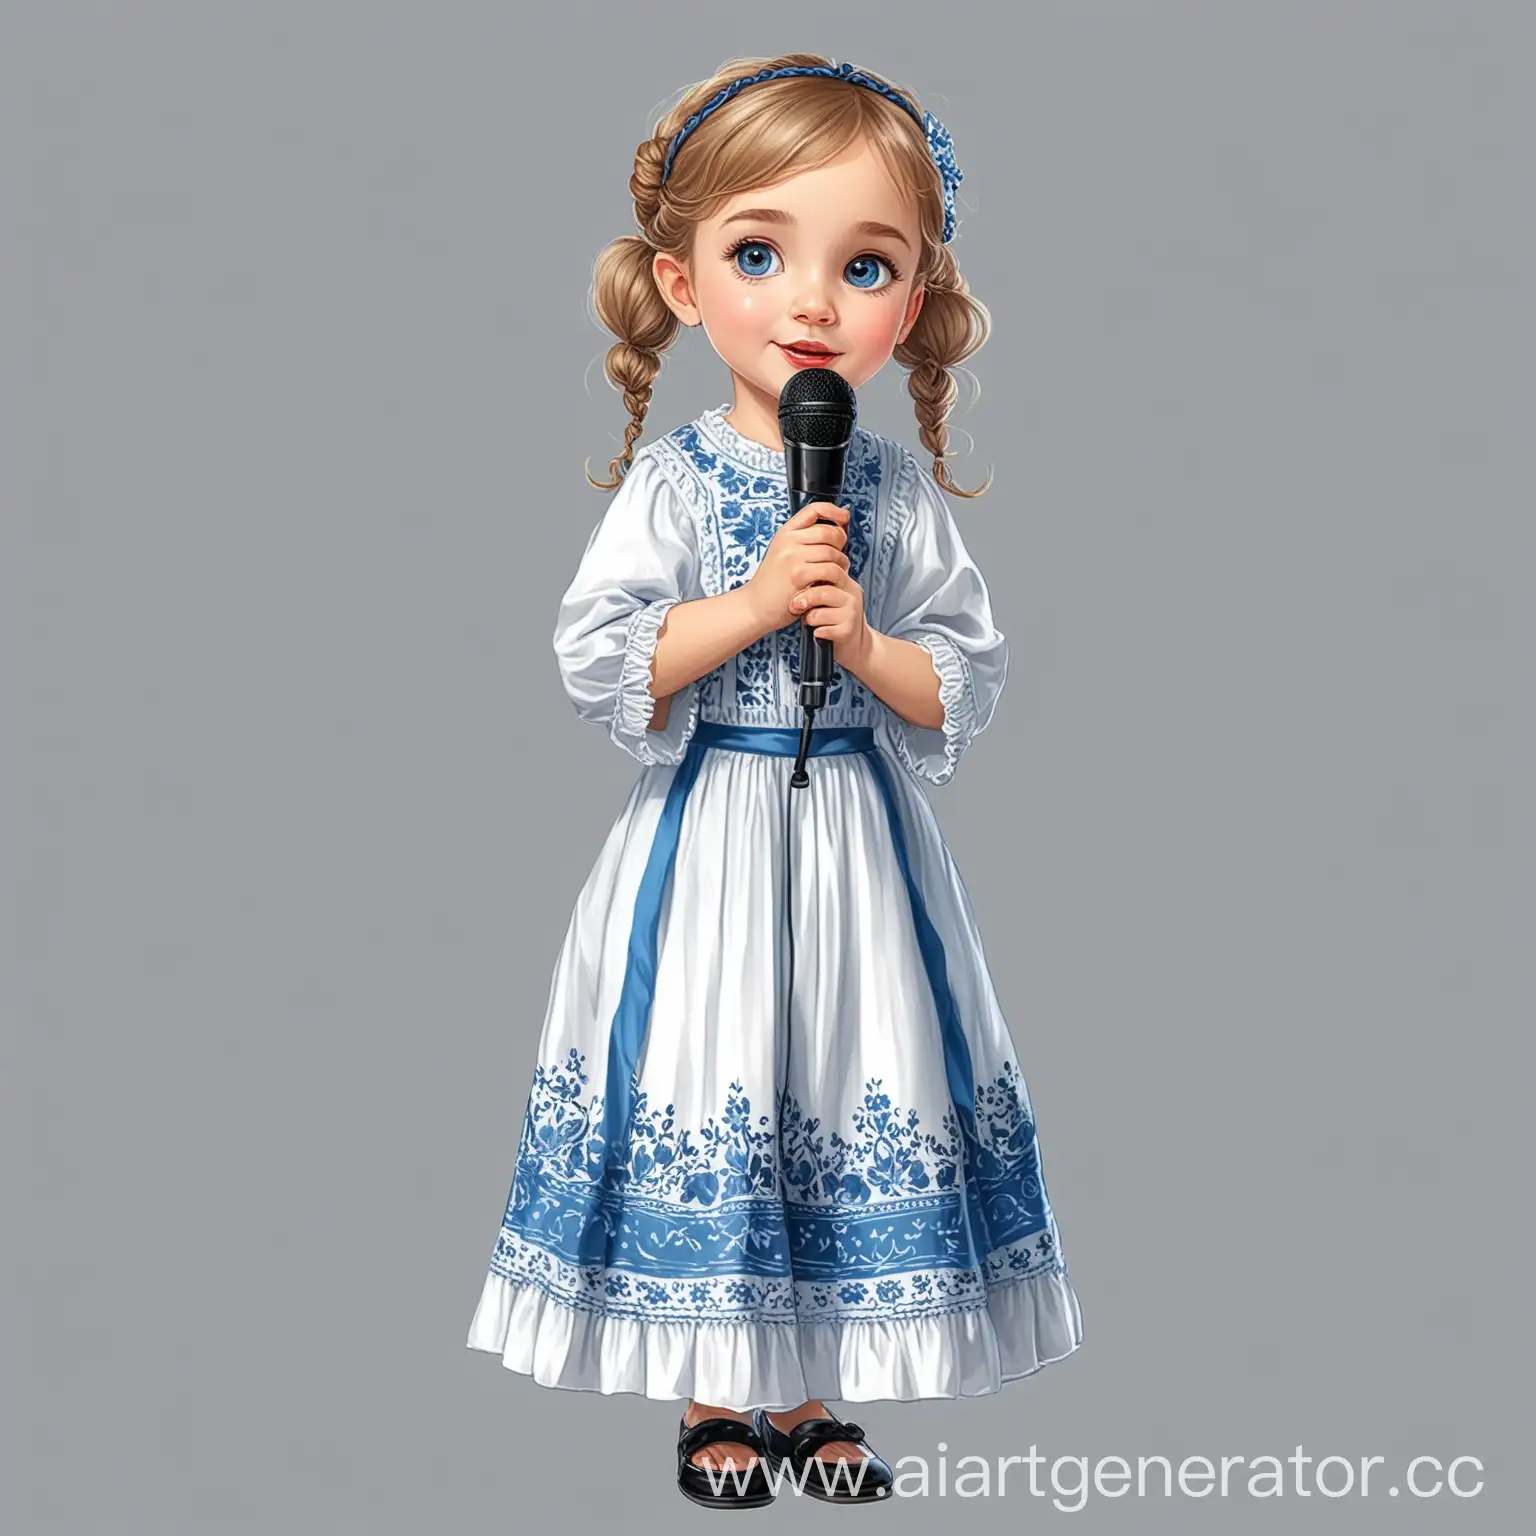 Belarusian-Girl-Child-Singer-with-Microphone-in-Traditional-White-Dress